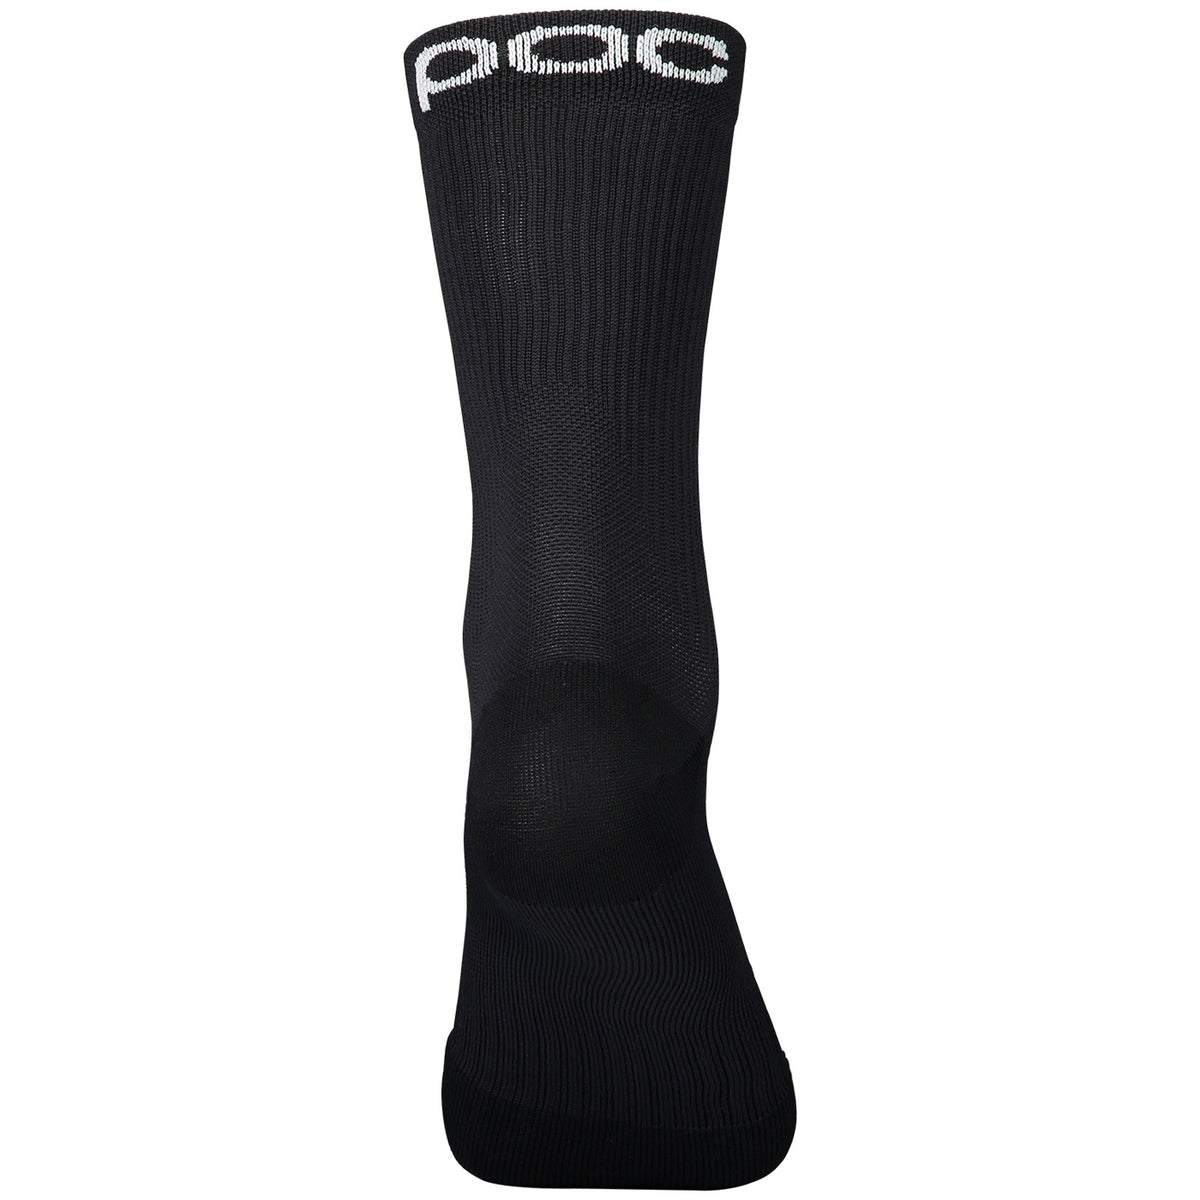 Calcetines Lithe Mtb - Negro | All4cycling